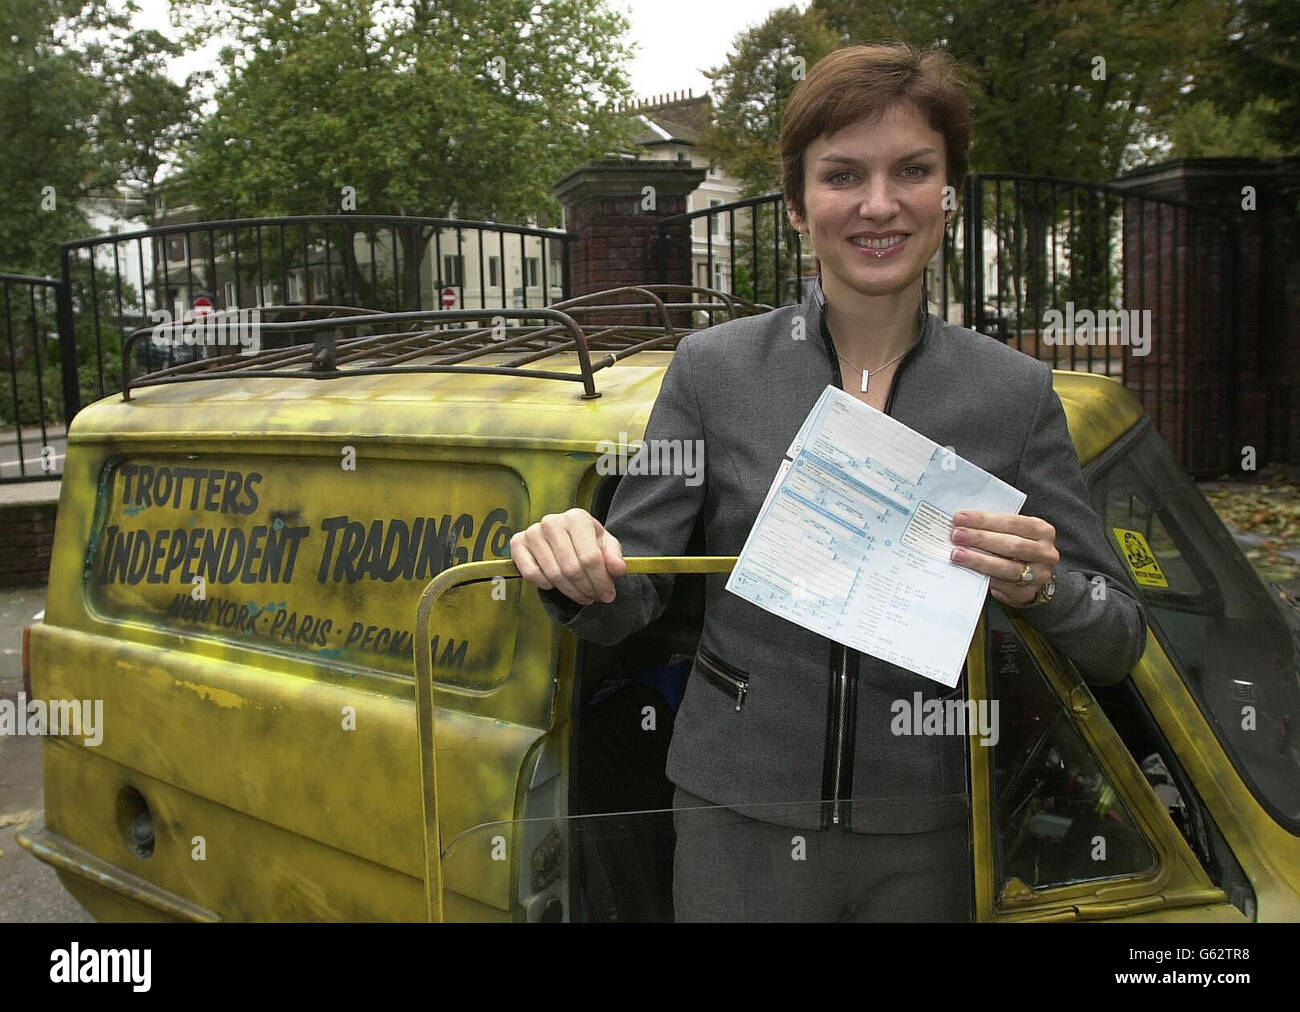 Crimewatch presenter Fiona Bruce stands in front of the famous Robin Reliant van from the comedy series Only Fools and Horses, at the Metropolitan Police Stolen Vehicles Unit in north London, where she announced changes to the DVLA V5 Log Book. *...The new style log book comes into usage in February 2003, with all information being stored on a central database. Stock Photo